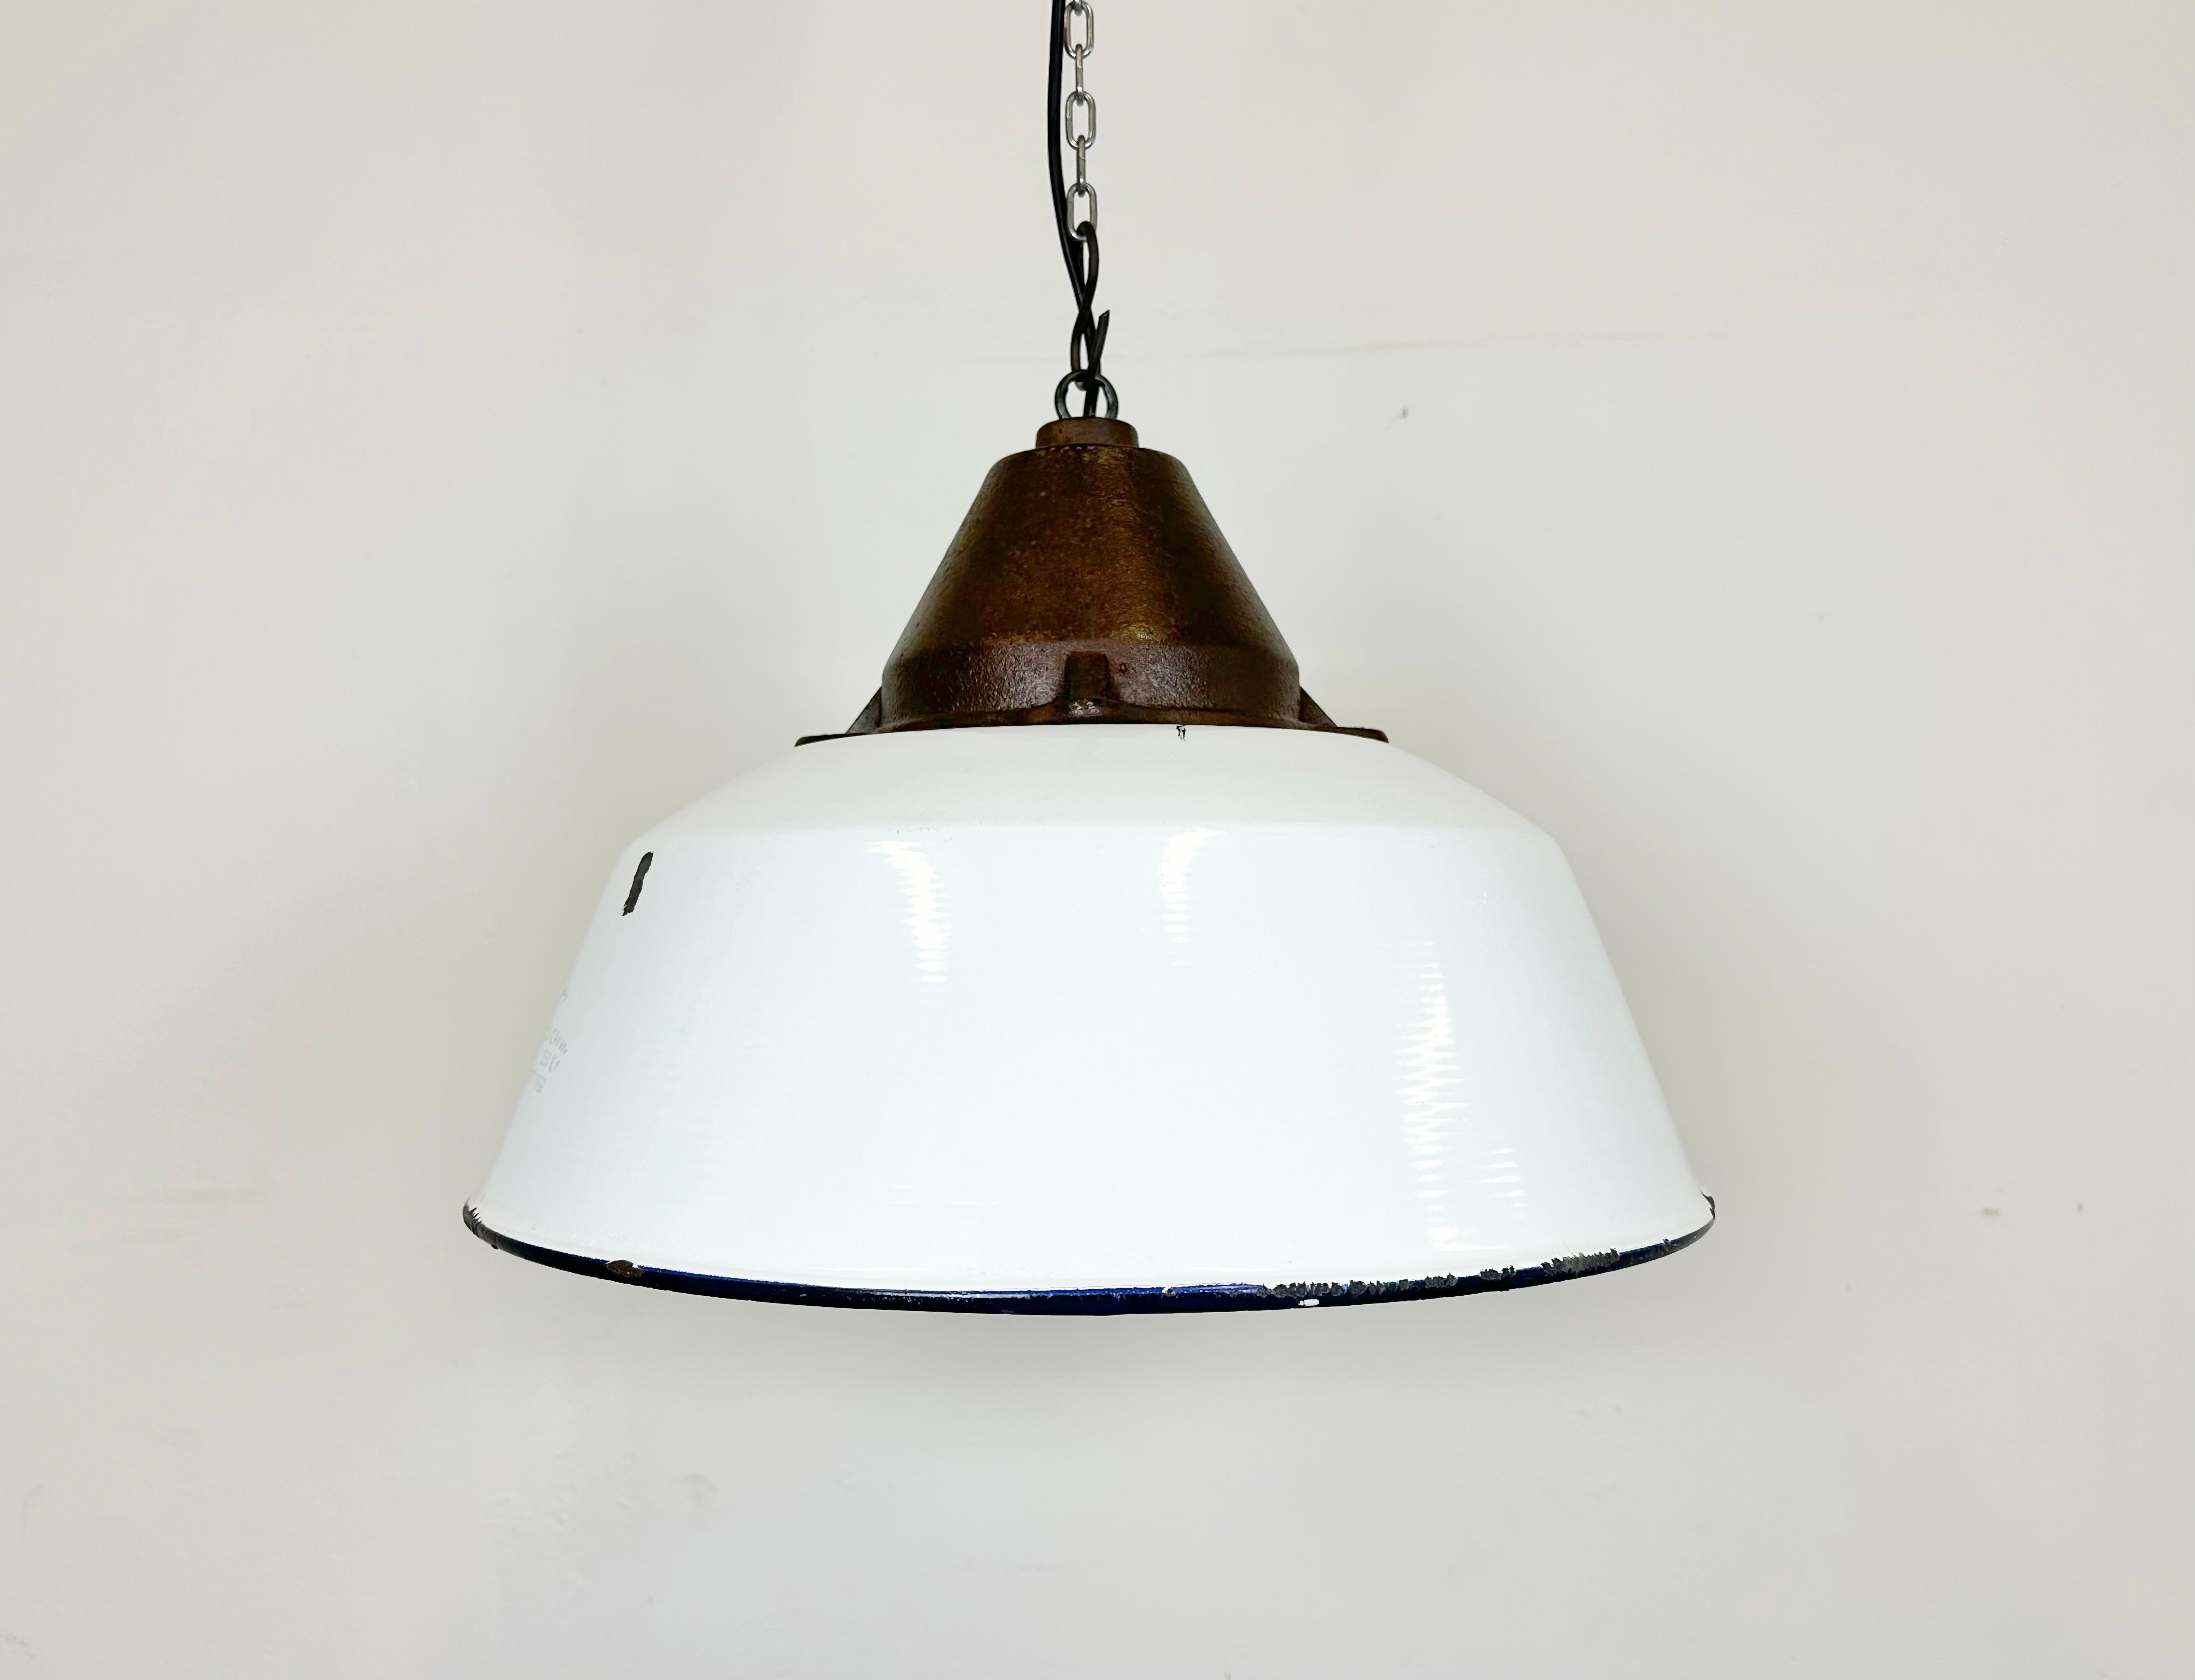 Industrial hanging lamp manufactured by Szarvasi Vas - Fém in Hungary during the 1960s. It features a white enamel shade, white enamel interior and a cast iron top. New porcelain socket requires E 27/ E26 light bulbs. New wire. The diameter of the